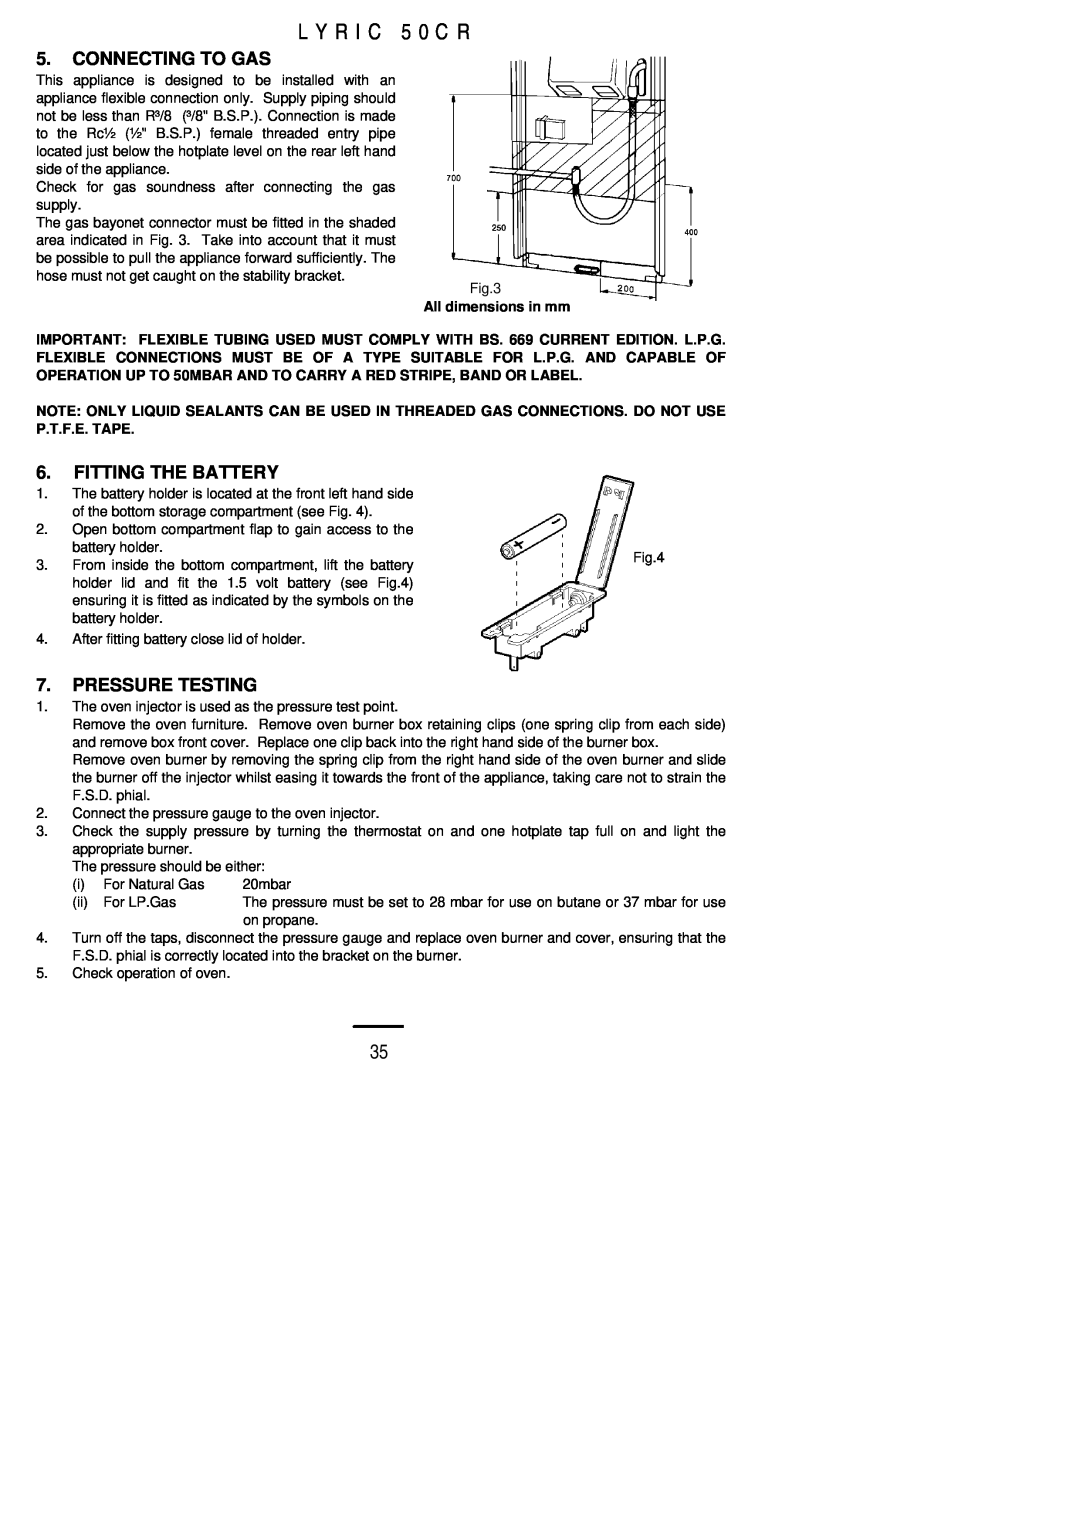 Electrolux 50 CR installation instructions L Y R I C 5 0 C R, Connecting To Gas, Fitting The Battery, Pressure Testing 